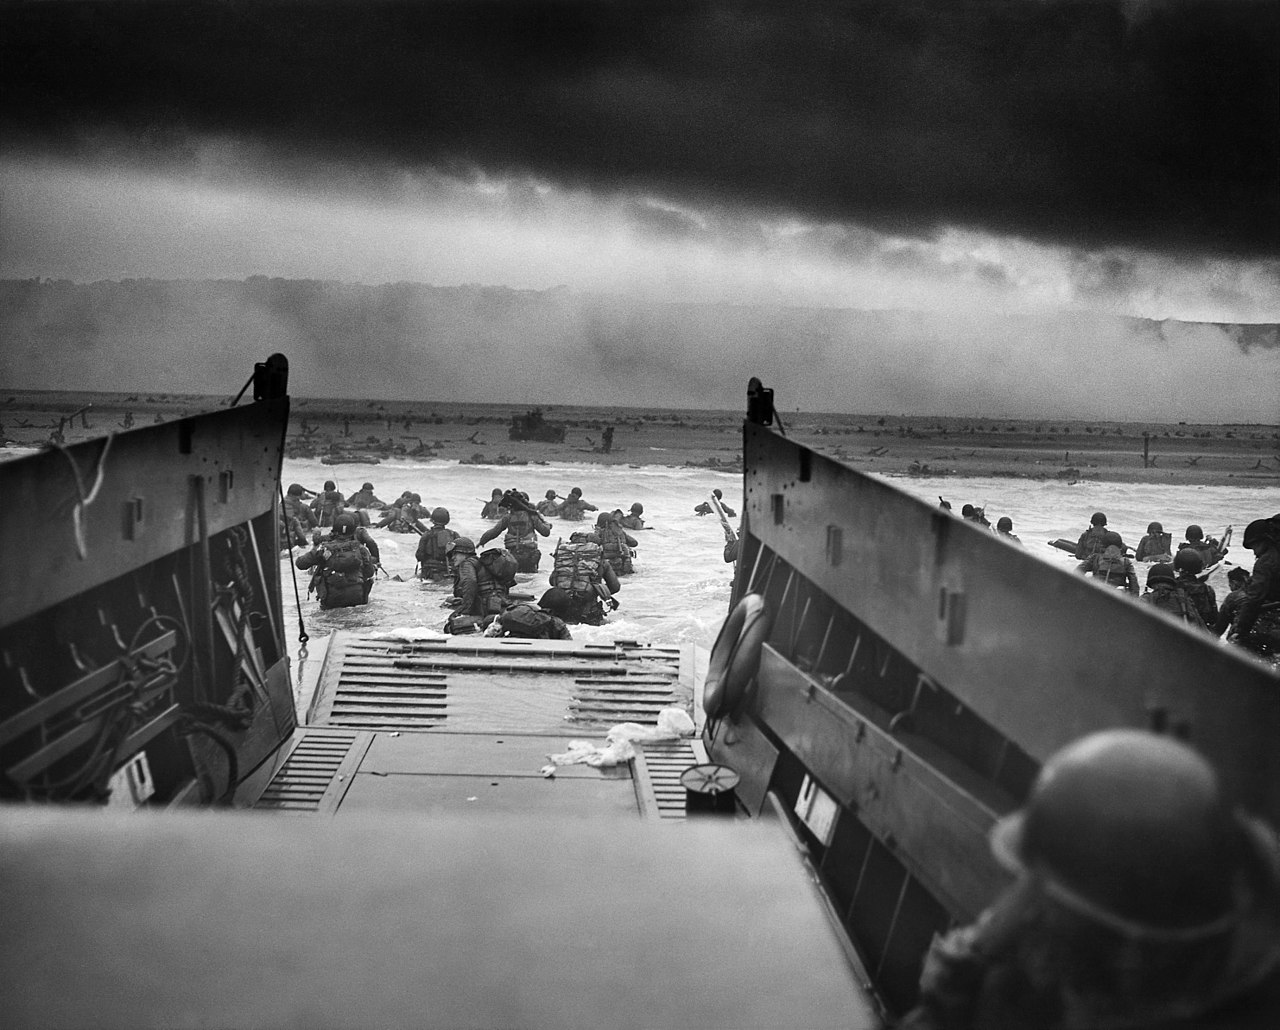 D-Day & the Triumph of Human Being